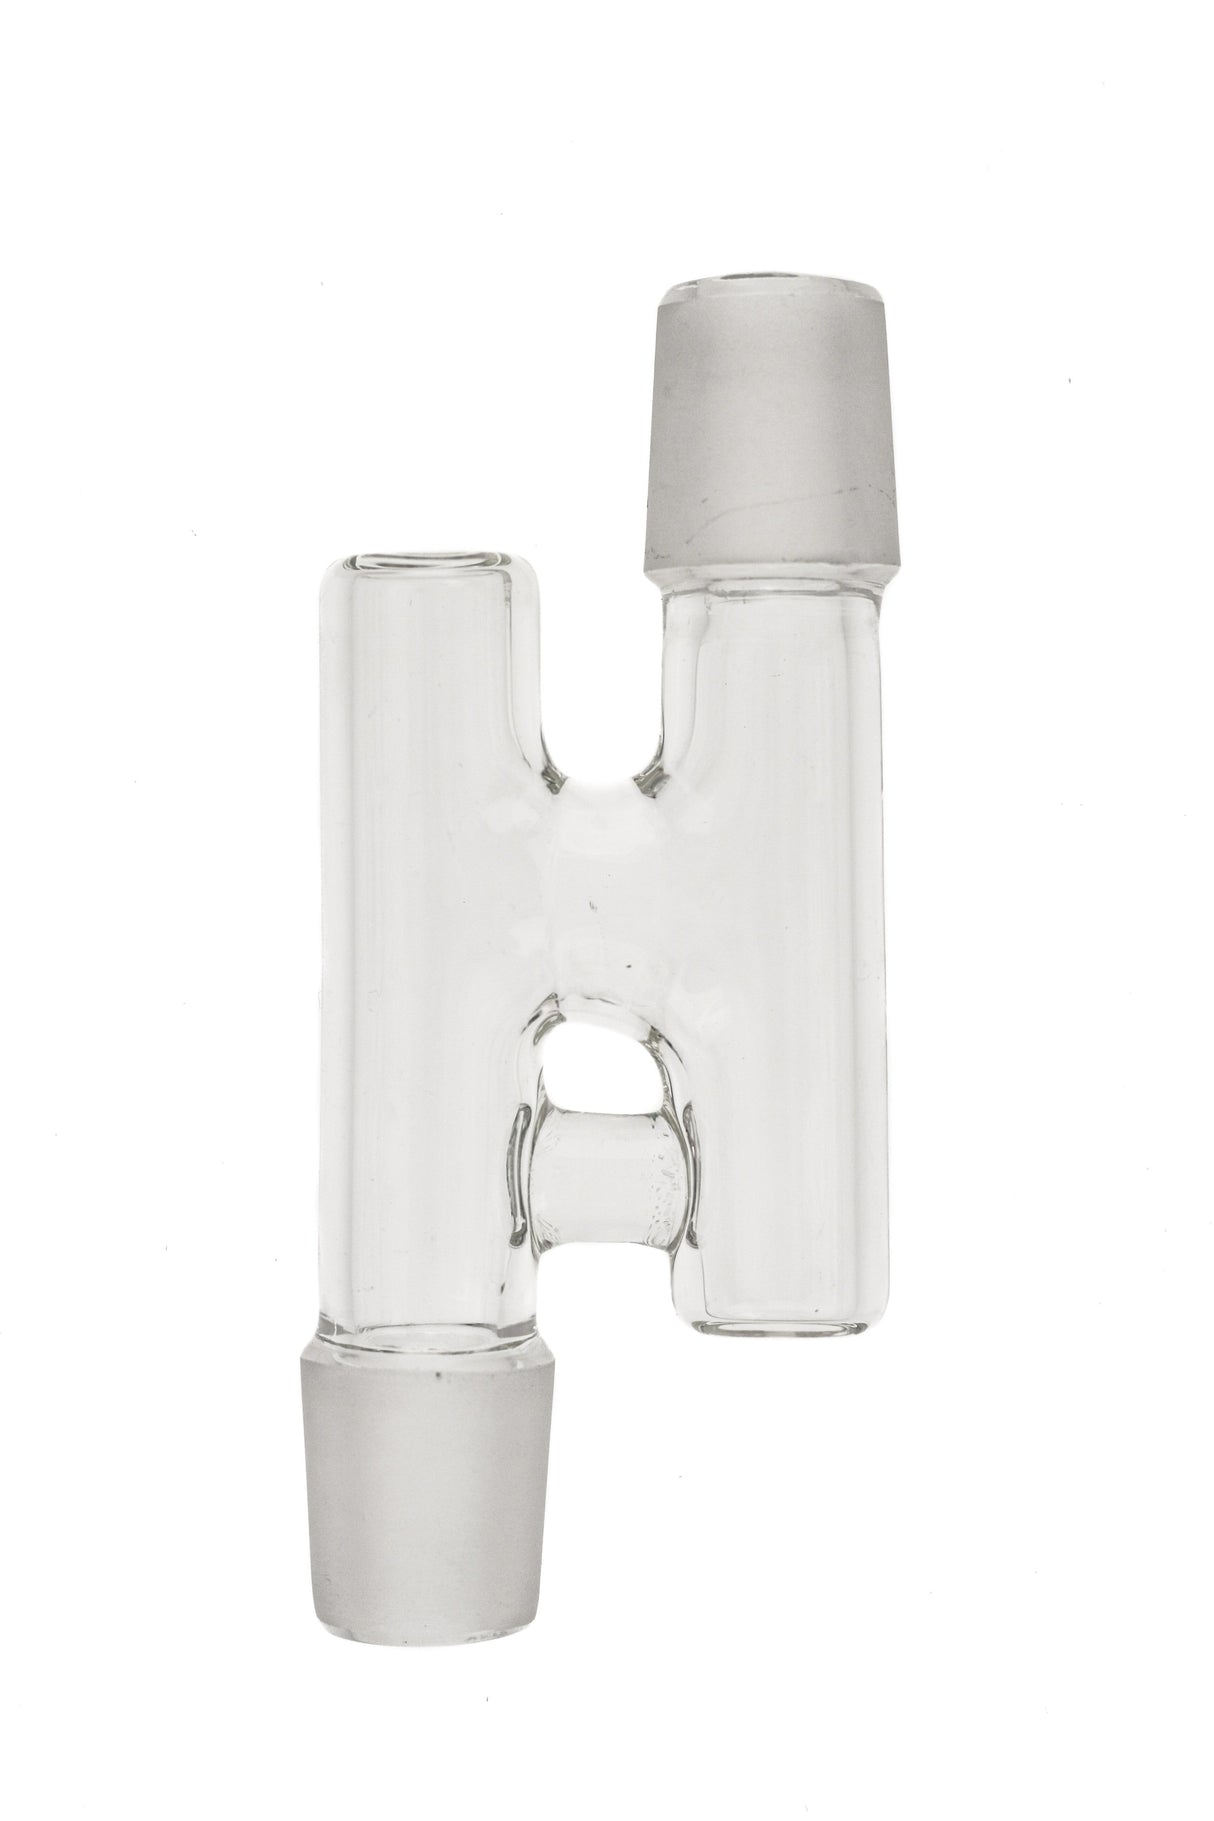 TAG - Universal Fit Reclaim Catcher Adapter for Bongs, Clear Glass, Front View